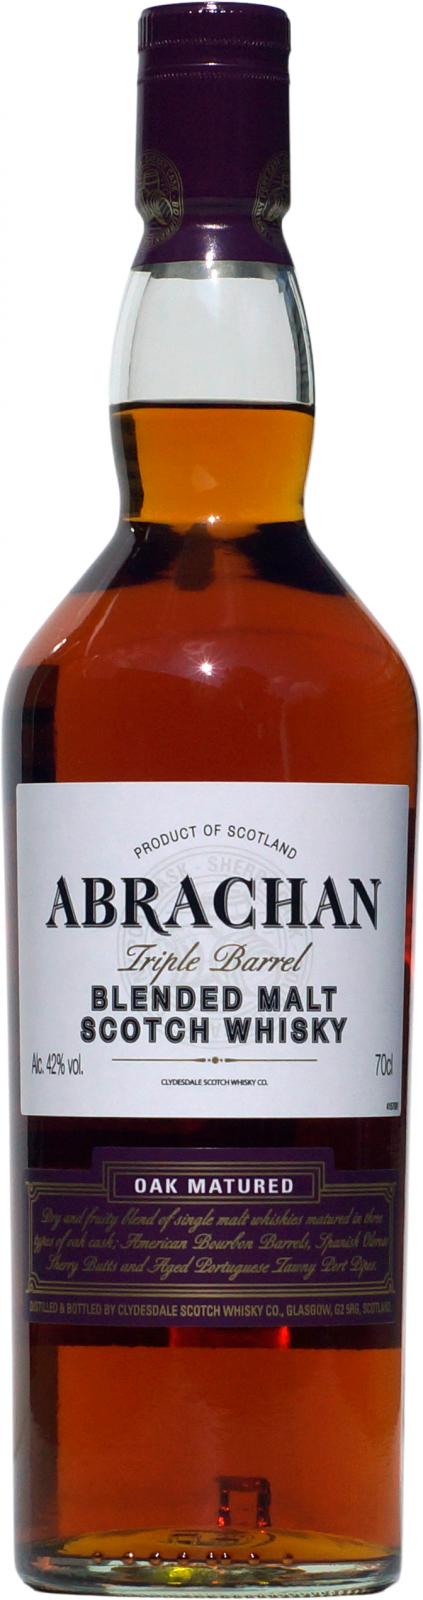 Whiskybase 04-year-old - Abrachan Cd reviews and - Ratings